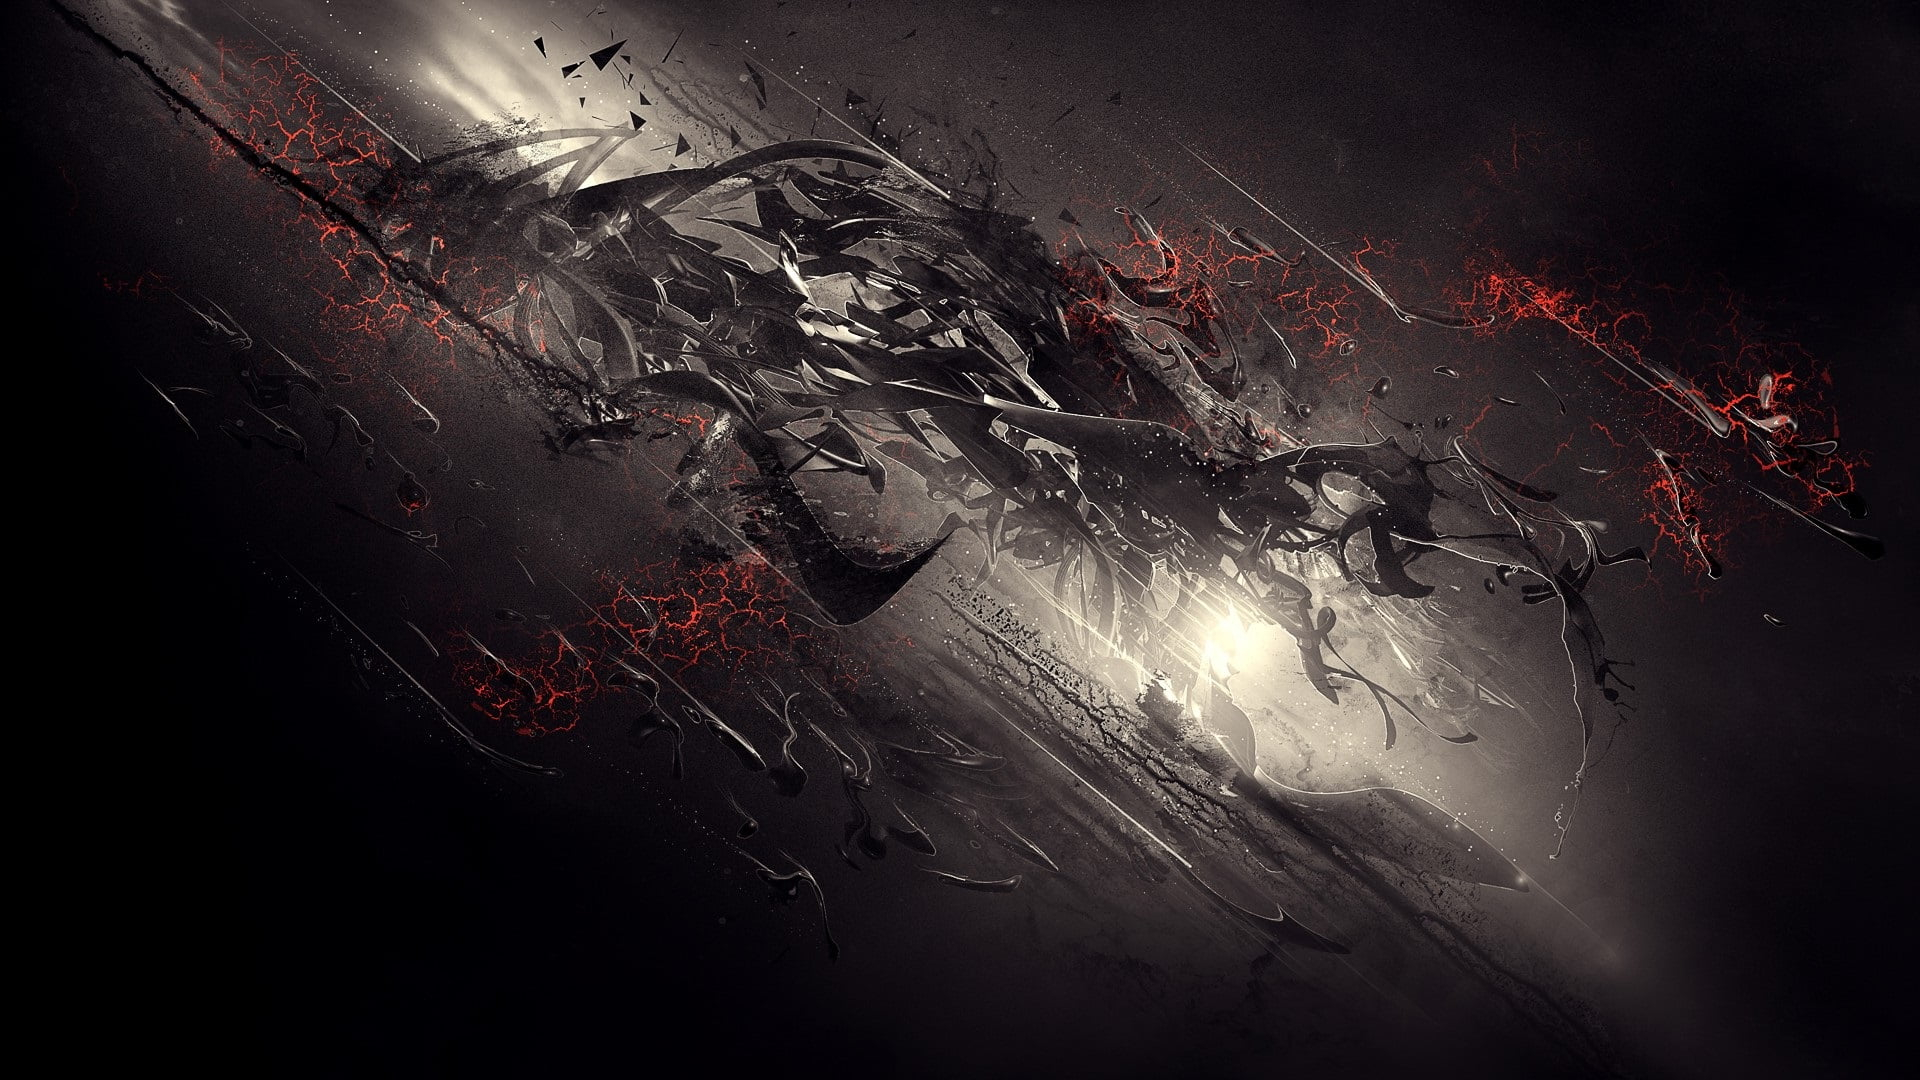 Black and red abstract painting, 3D Abstract, digital art, dark wallpaper